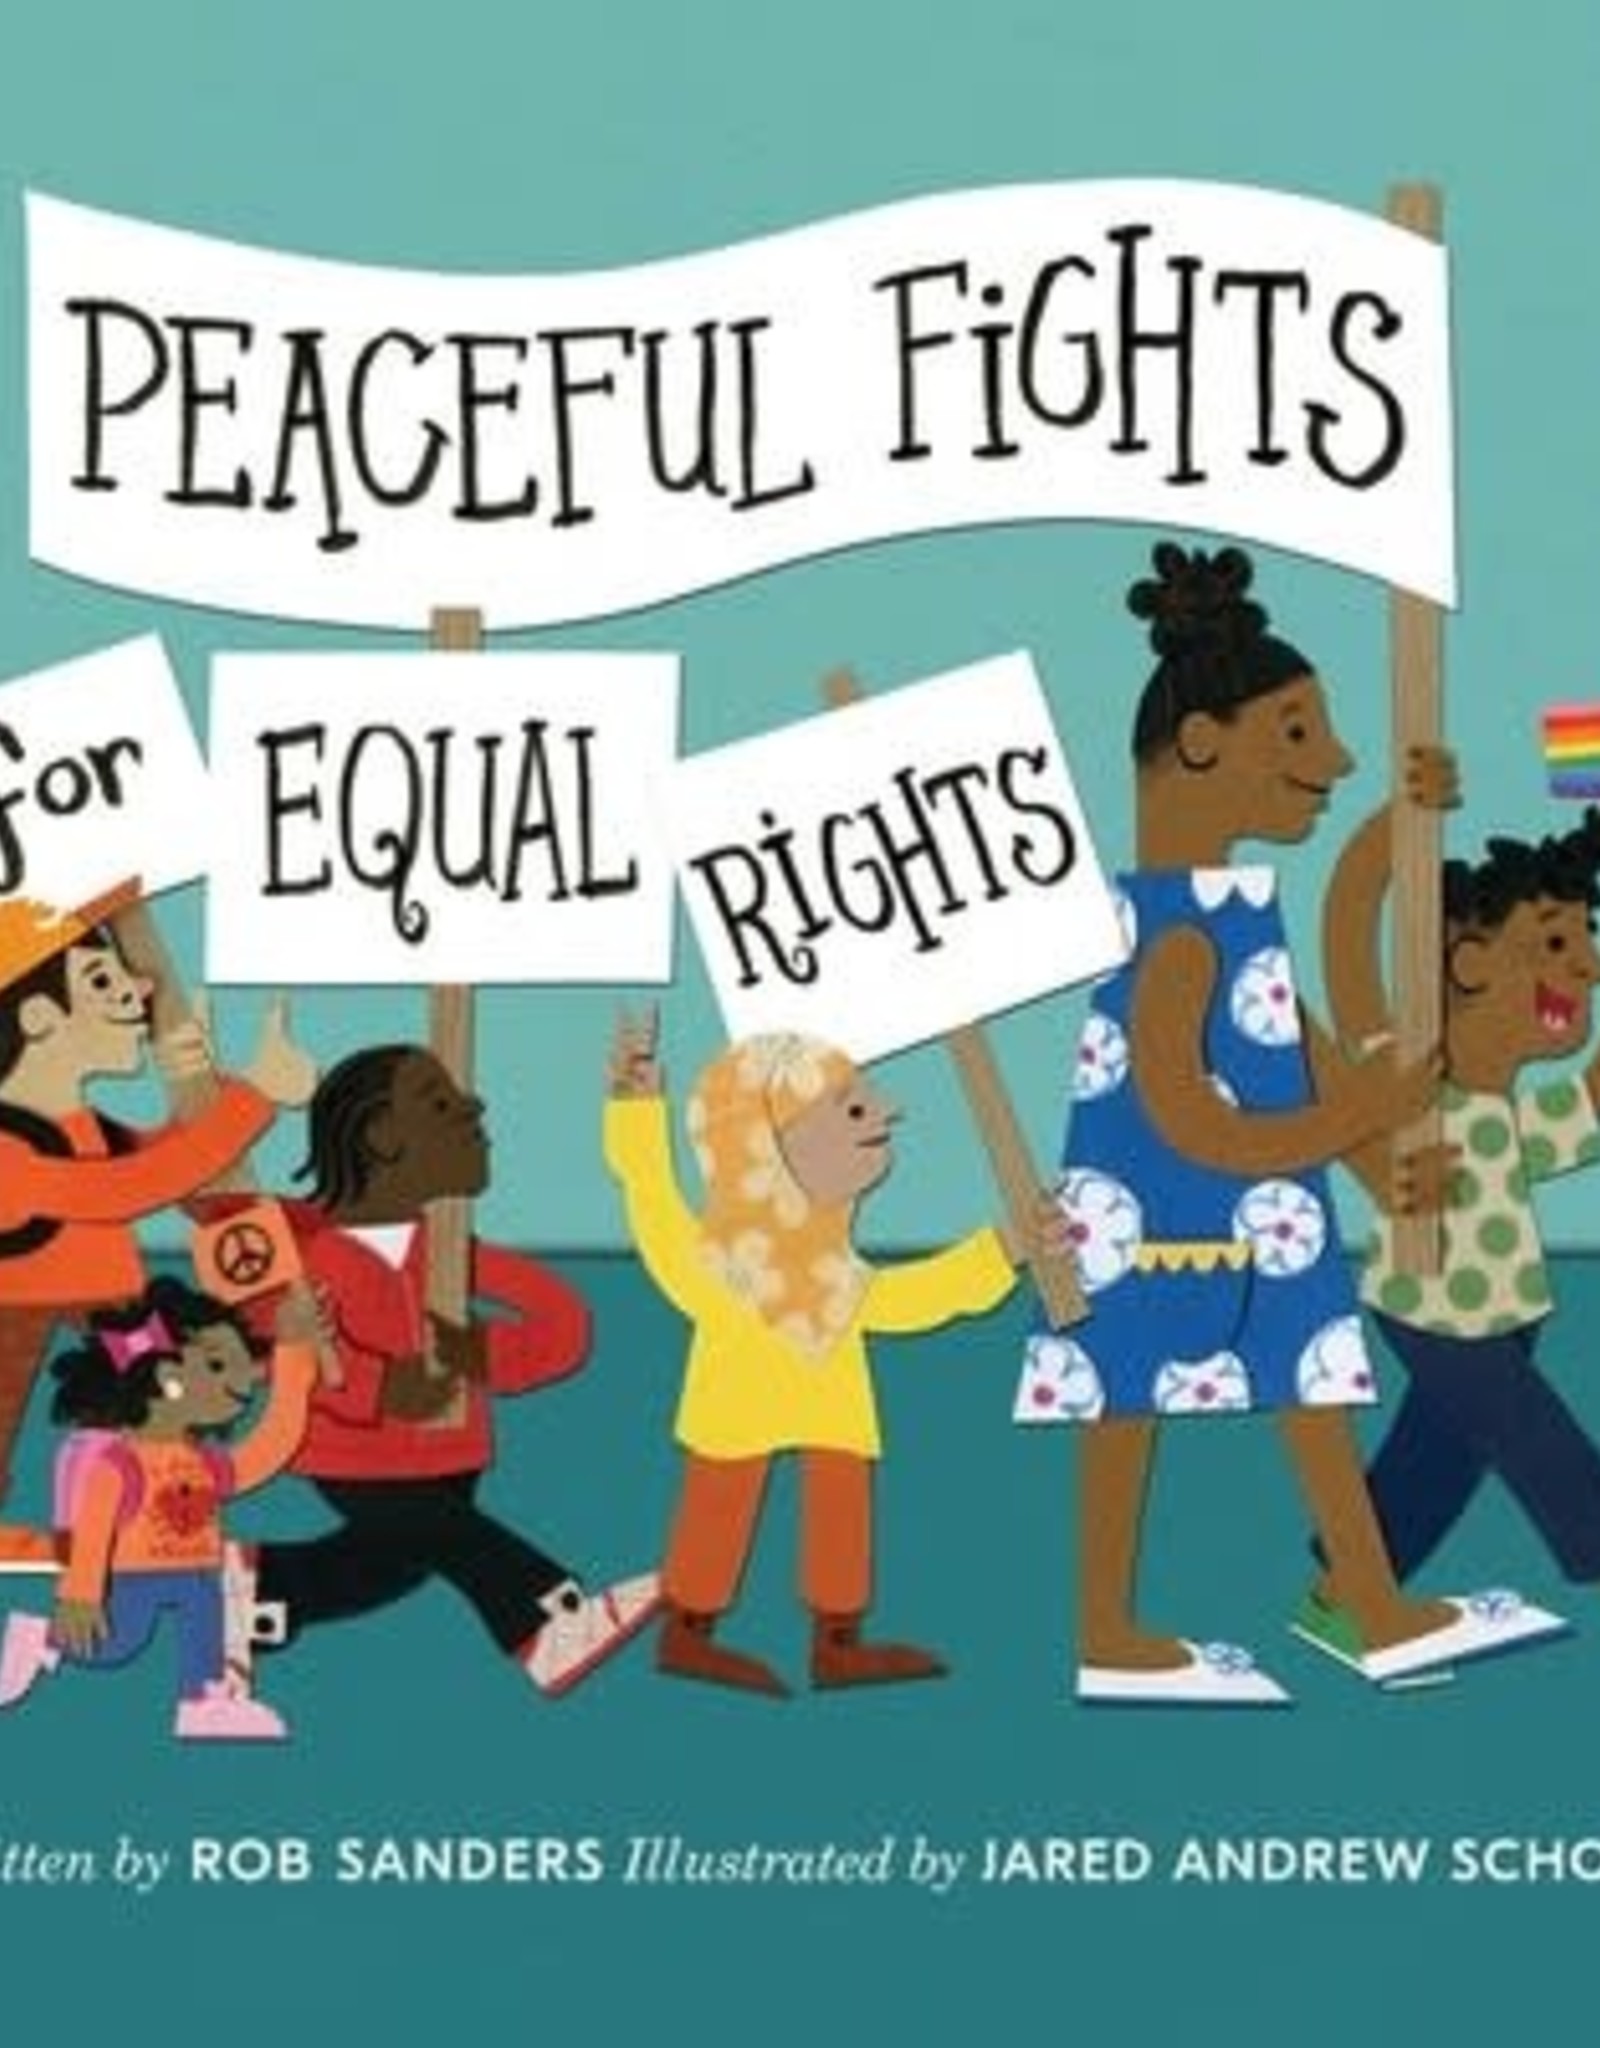 Simon & Schuster Peaceful Fights for Equal Rights